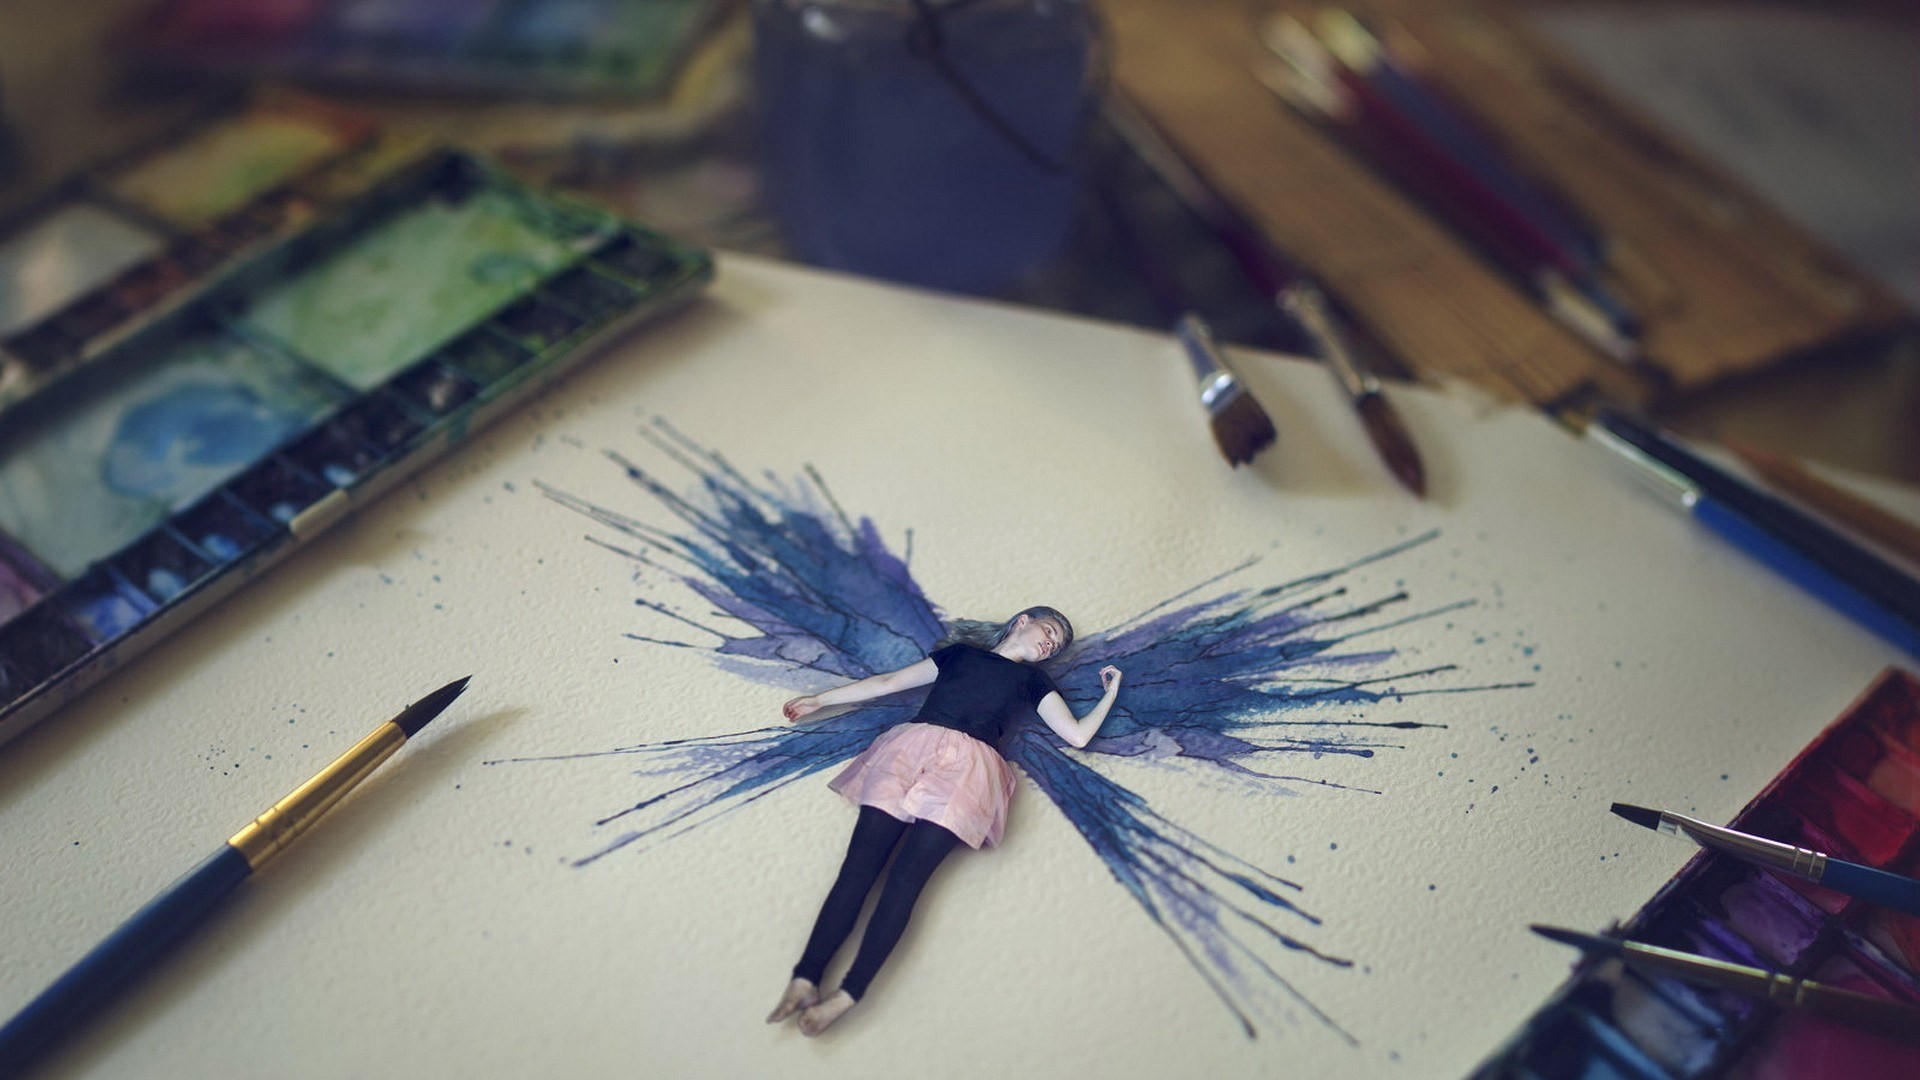 Fantasy Art Women Photo Manipulation Wings Painting Paintbrushes Paper Colorful Depth Of Field Black 1920x1080